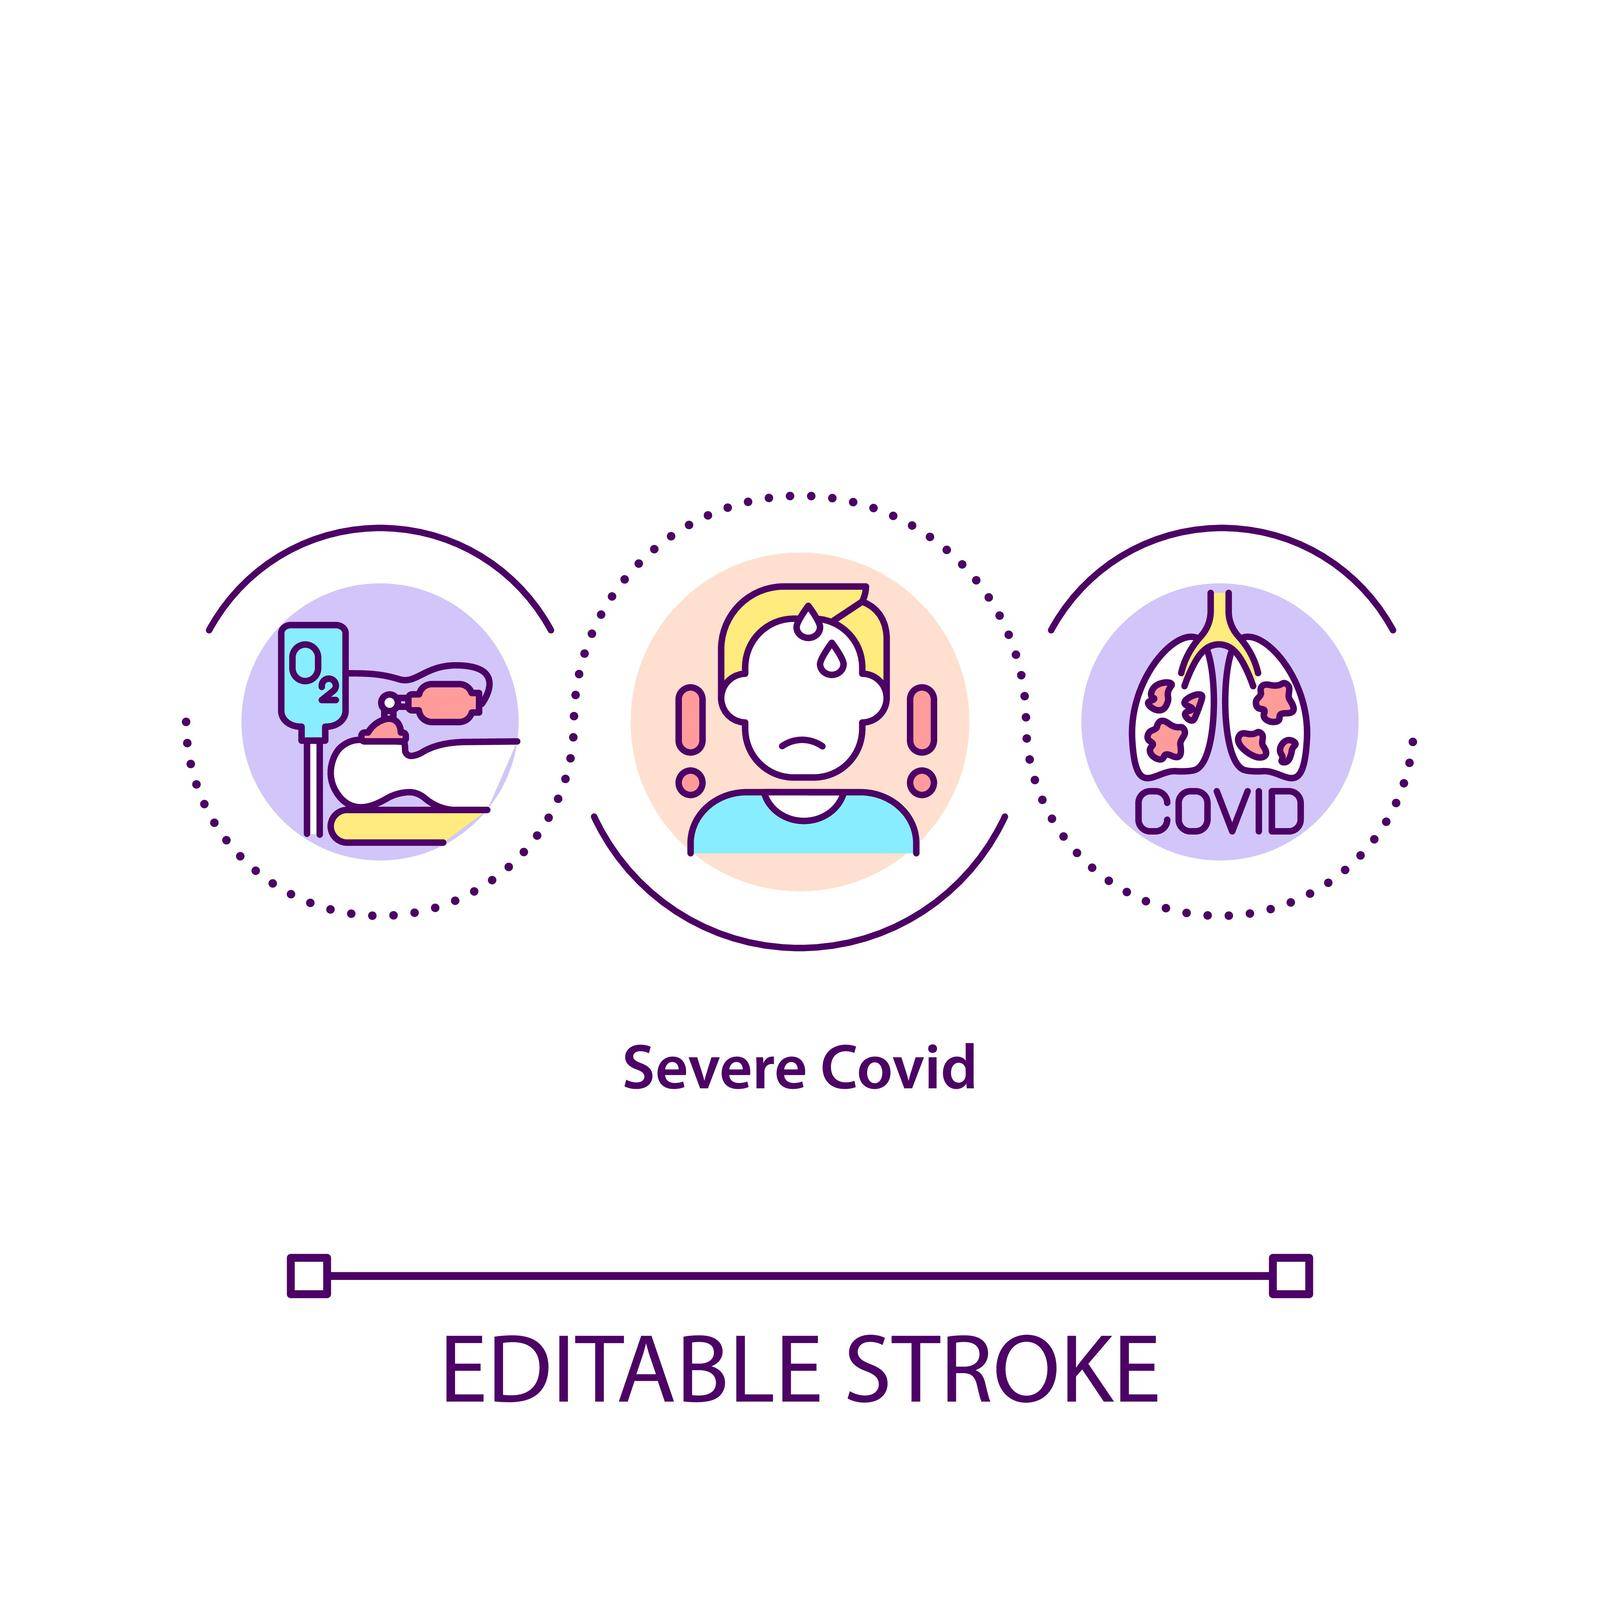 Severe covid concept icon by bsd